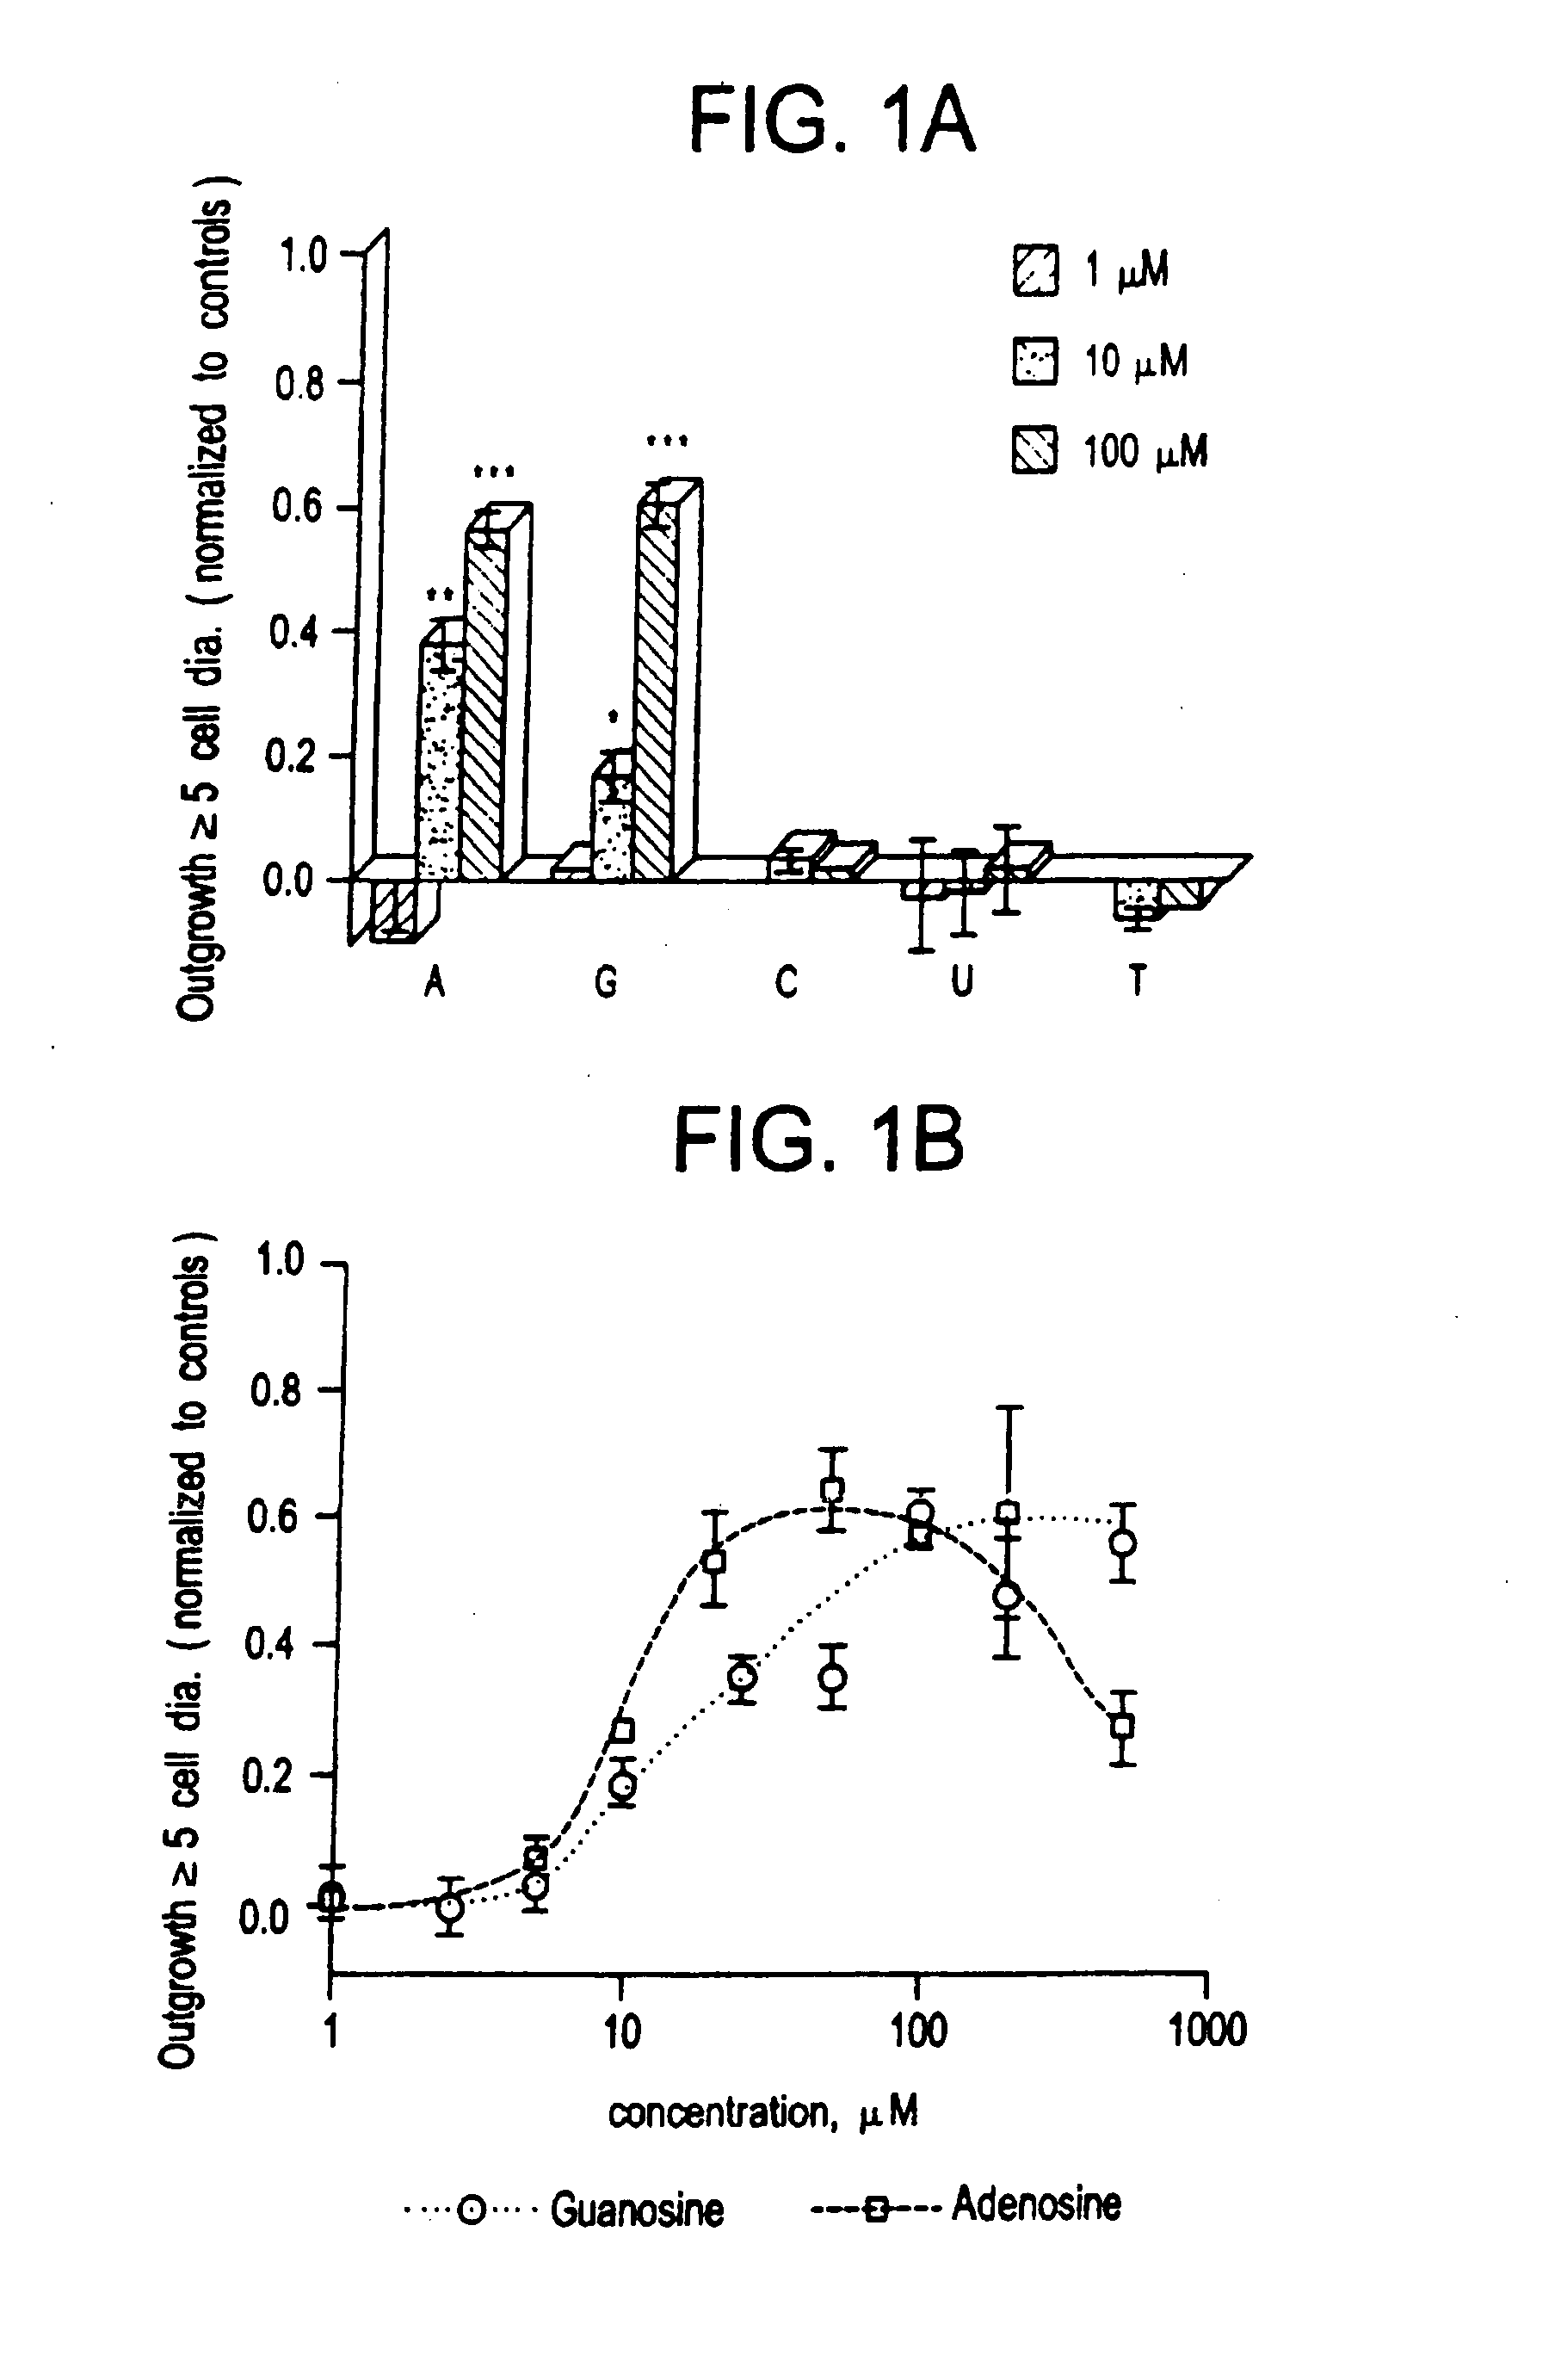 Methods for modulating the axonal growth of central nervous system neurons